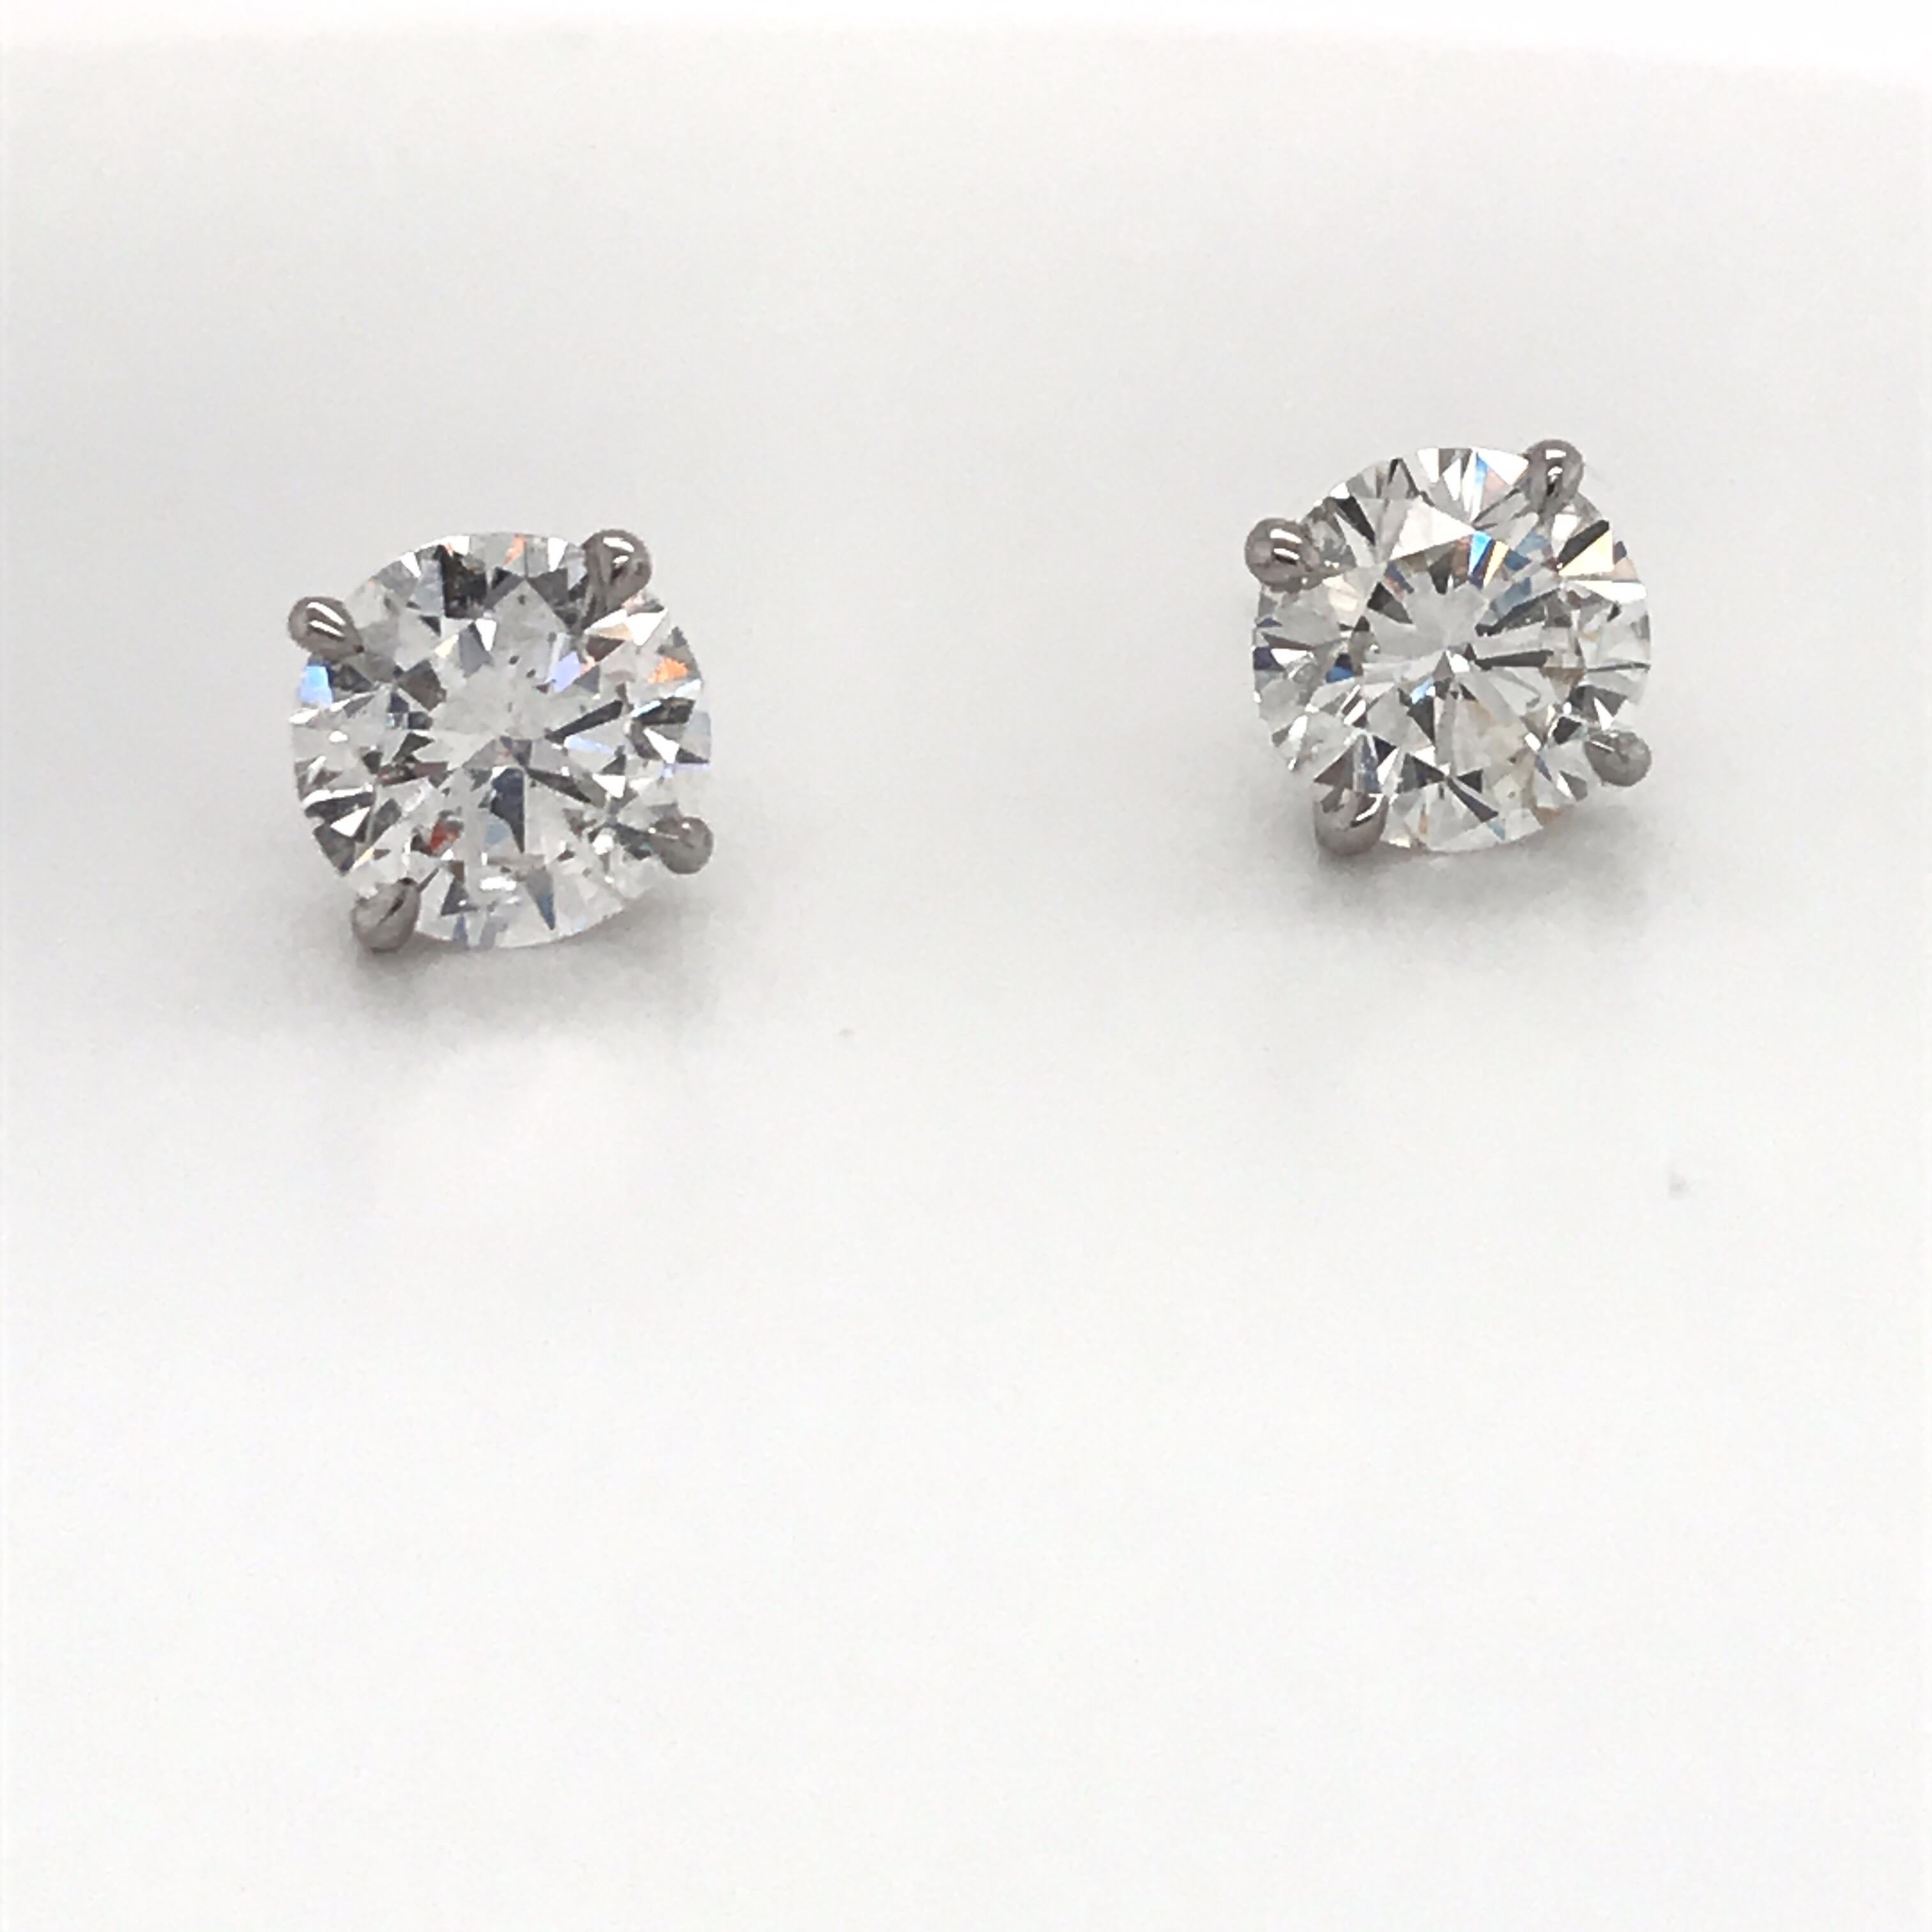 14K White gold diamond stud earrings weighing 2.03 carats in a 4 prong martini setting.
Color F-G
Clarity SI3-I1